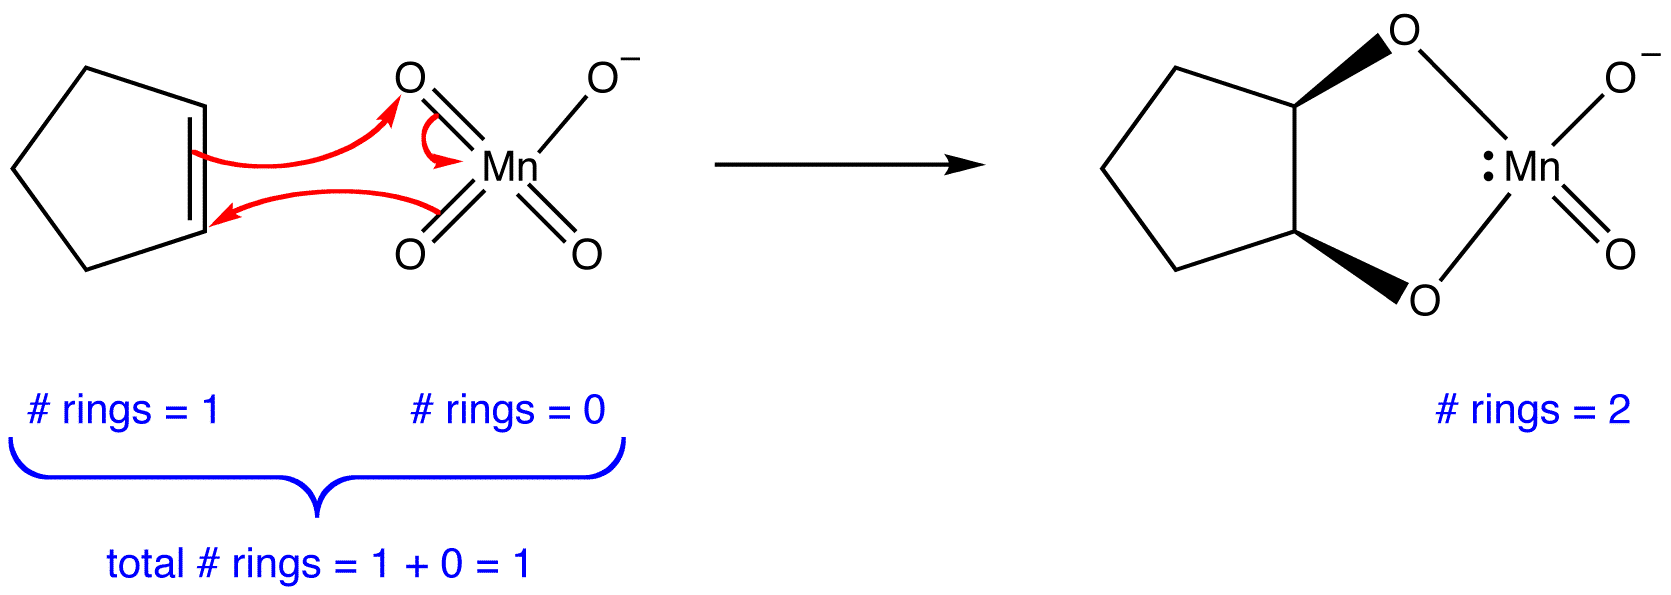 cycloaddition2.png